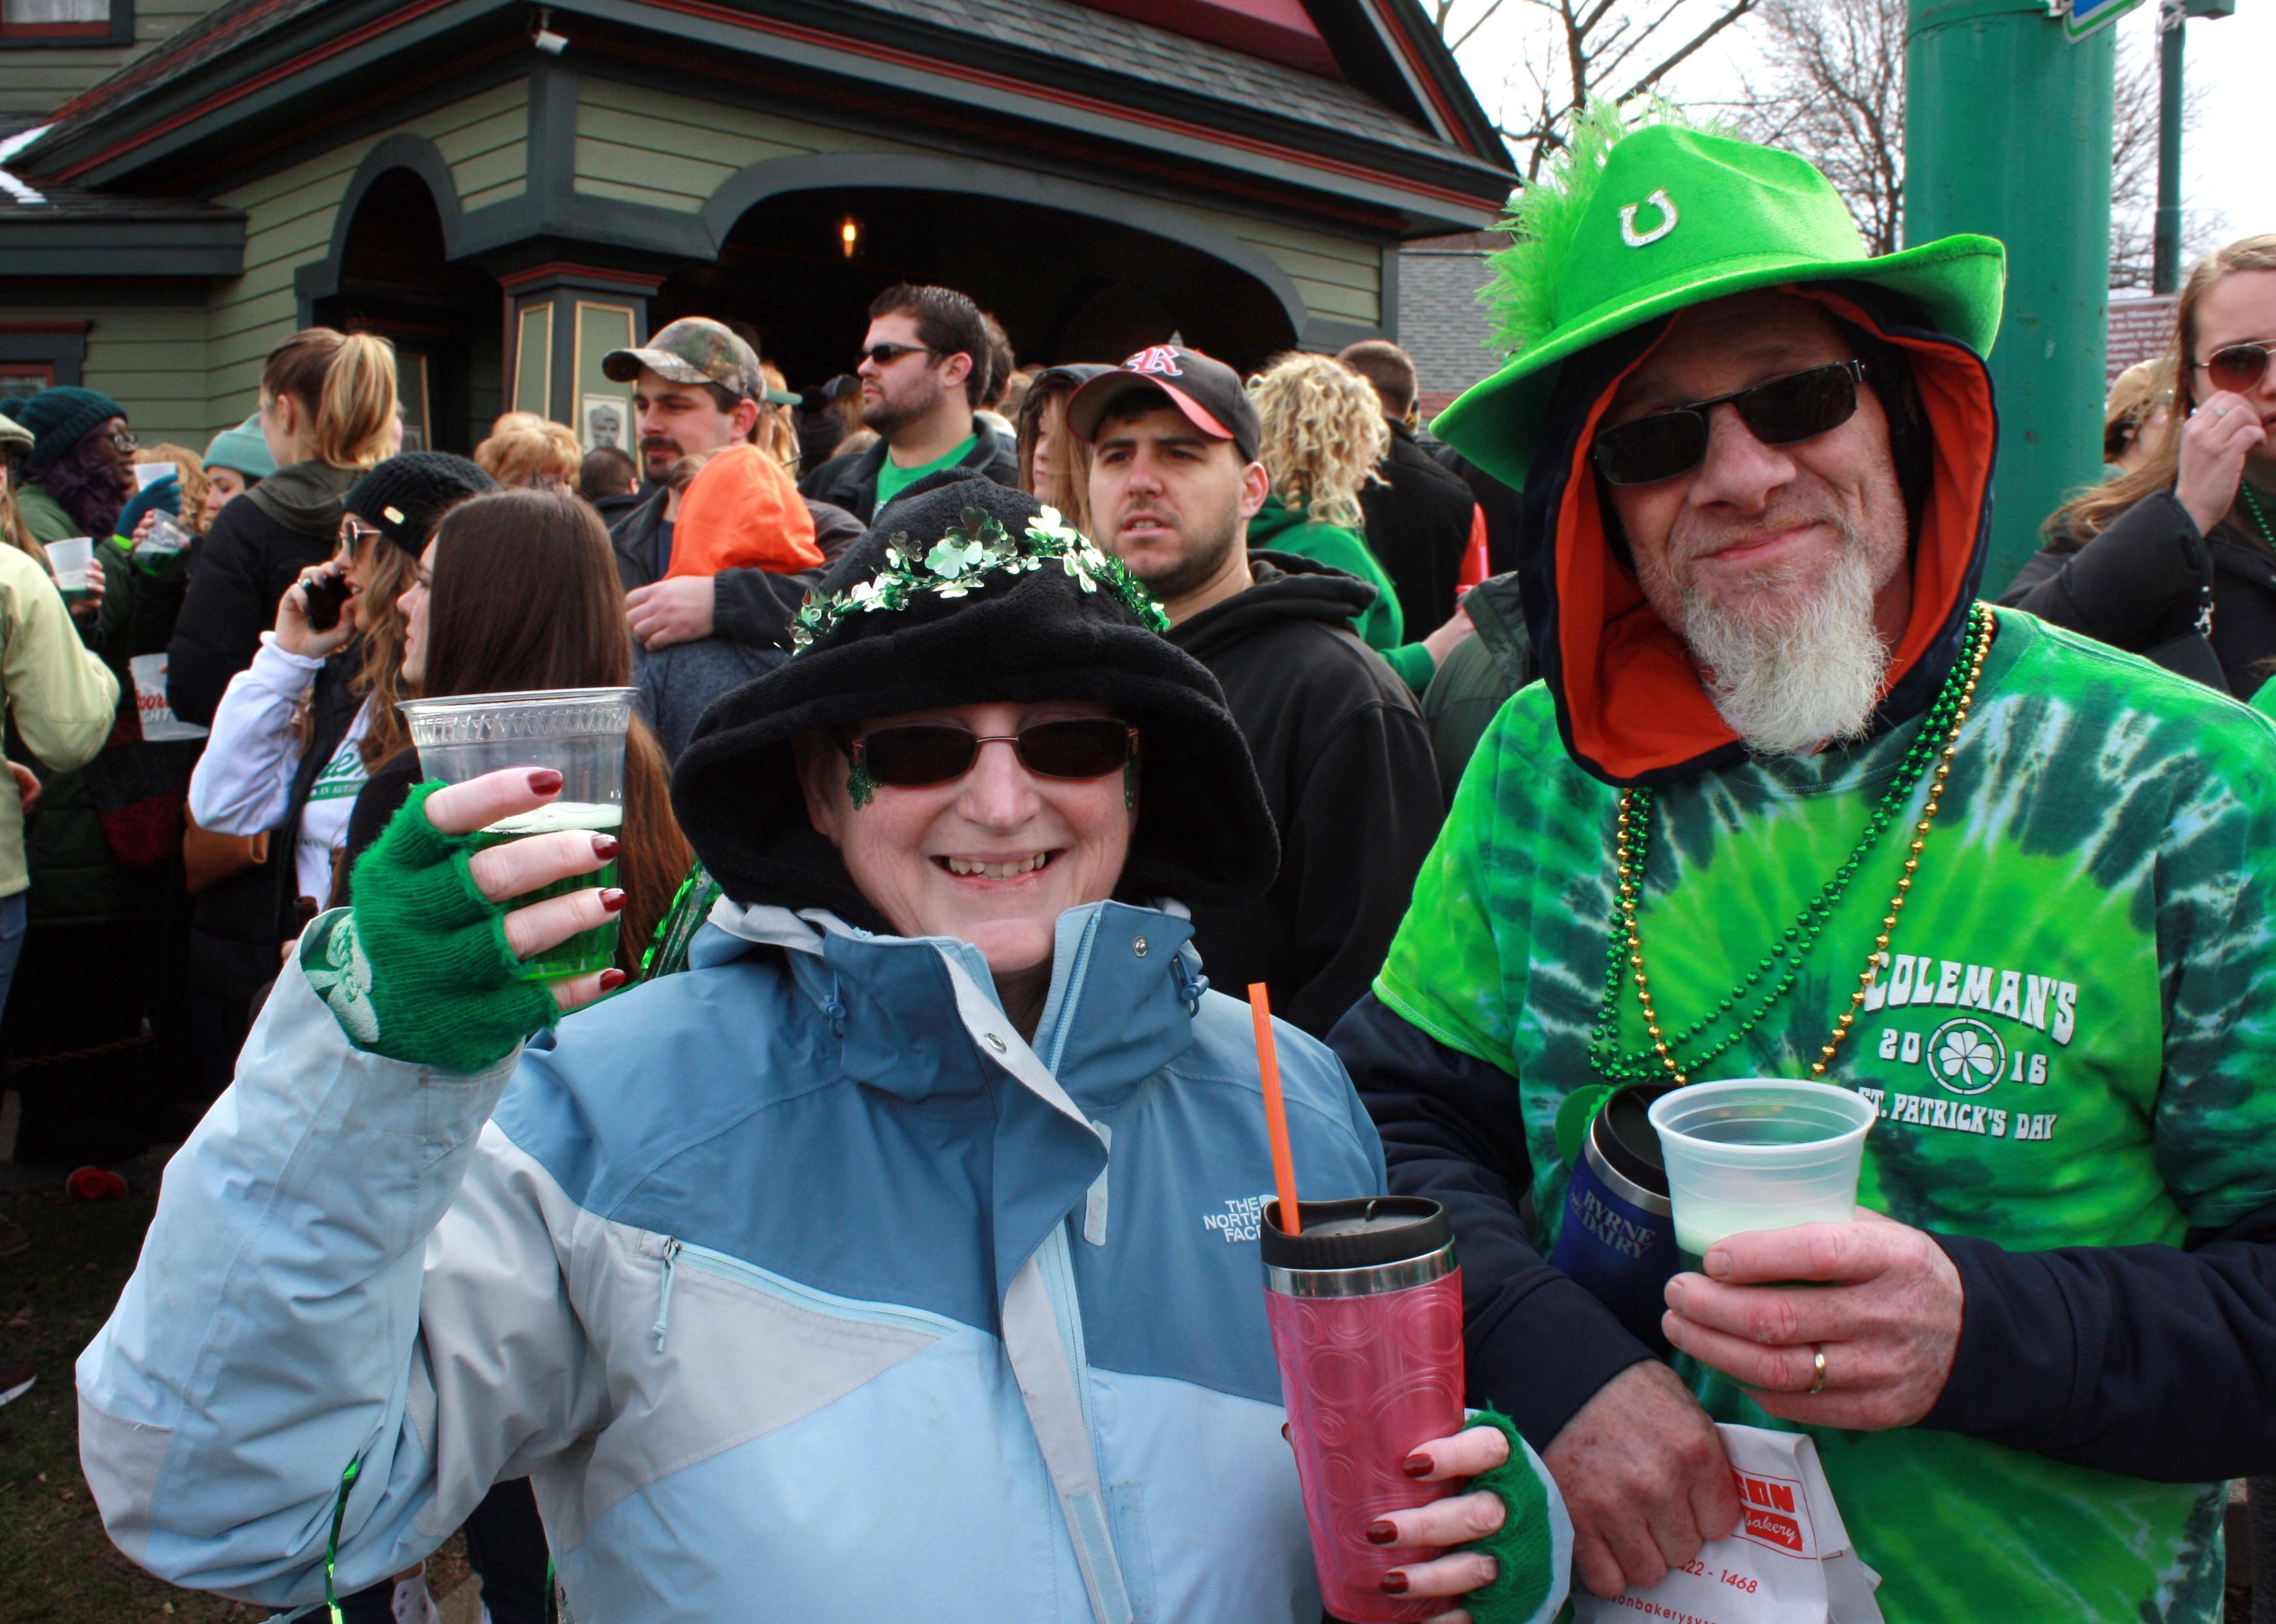 Charlene Staiano’s birthday falls on St. Patrick’s Day, so naturally she loves Green Beer Sunday, which is the “start of the celebration.” Charlene and husband John even decorate their house for the occasion. 
